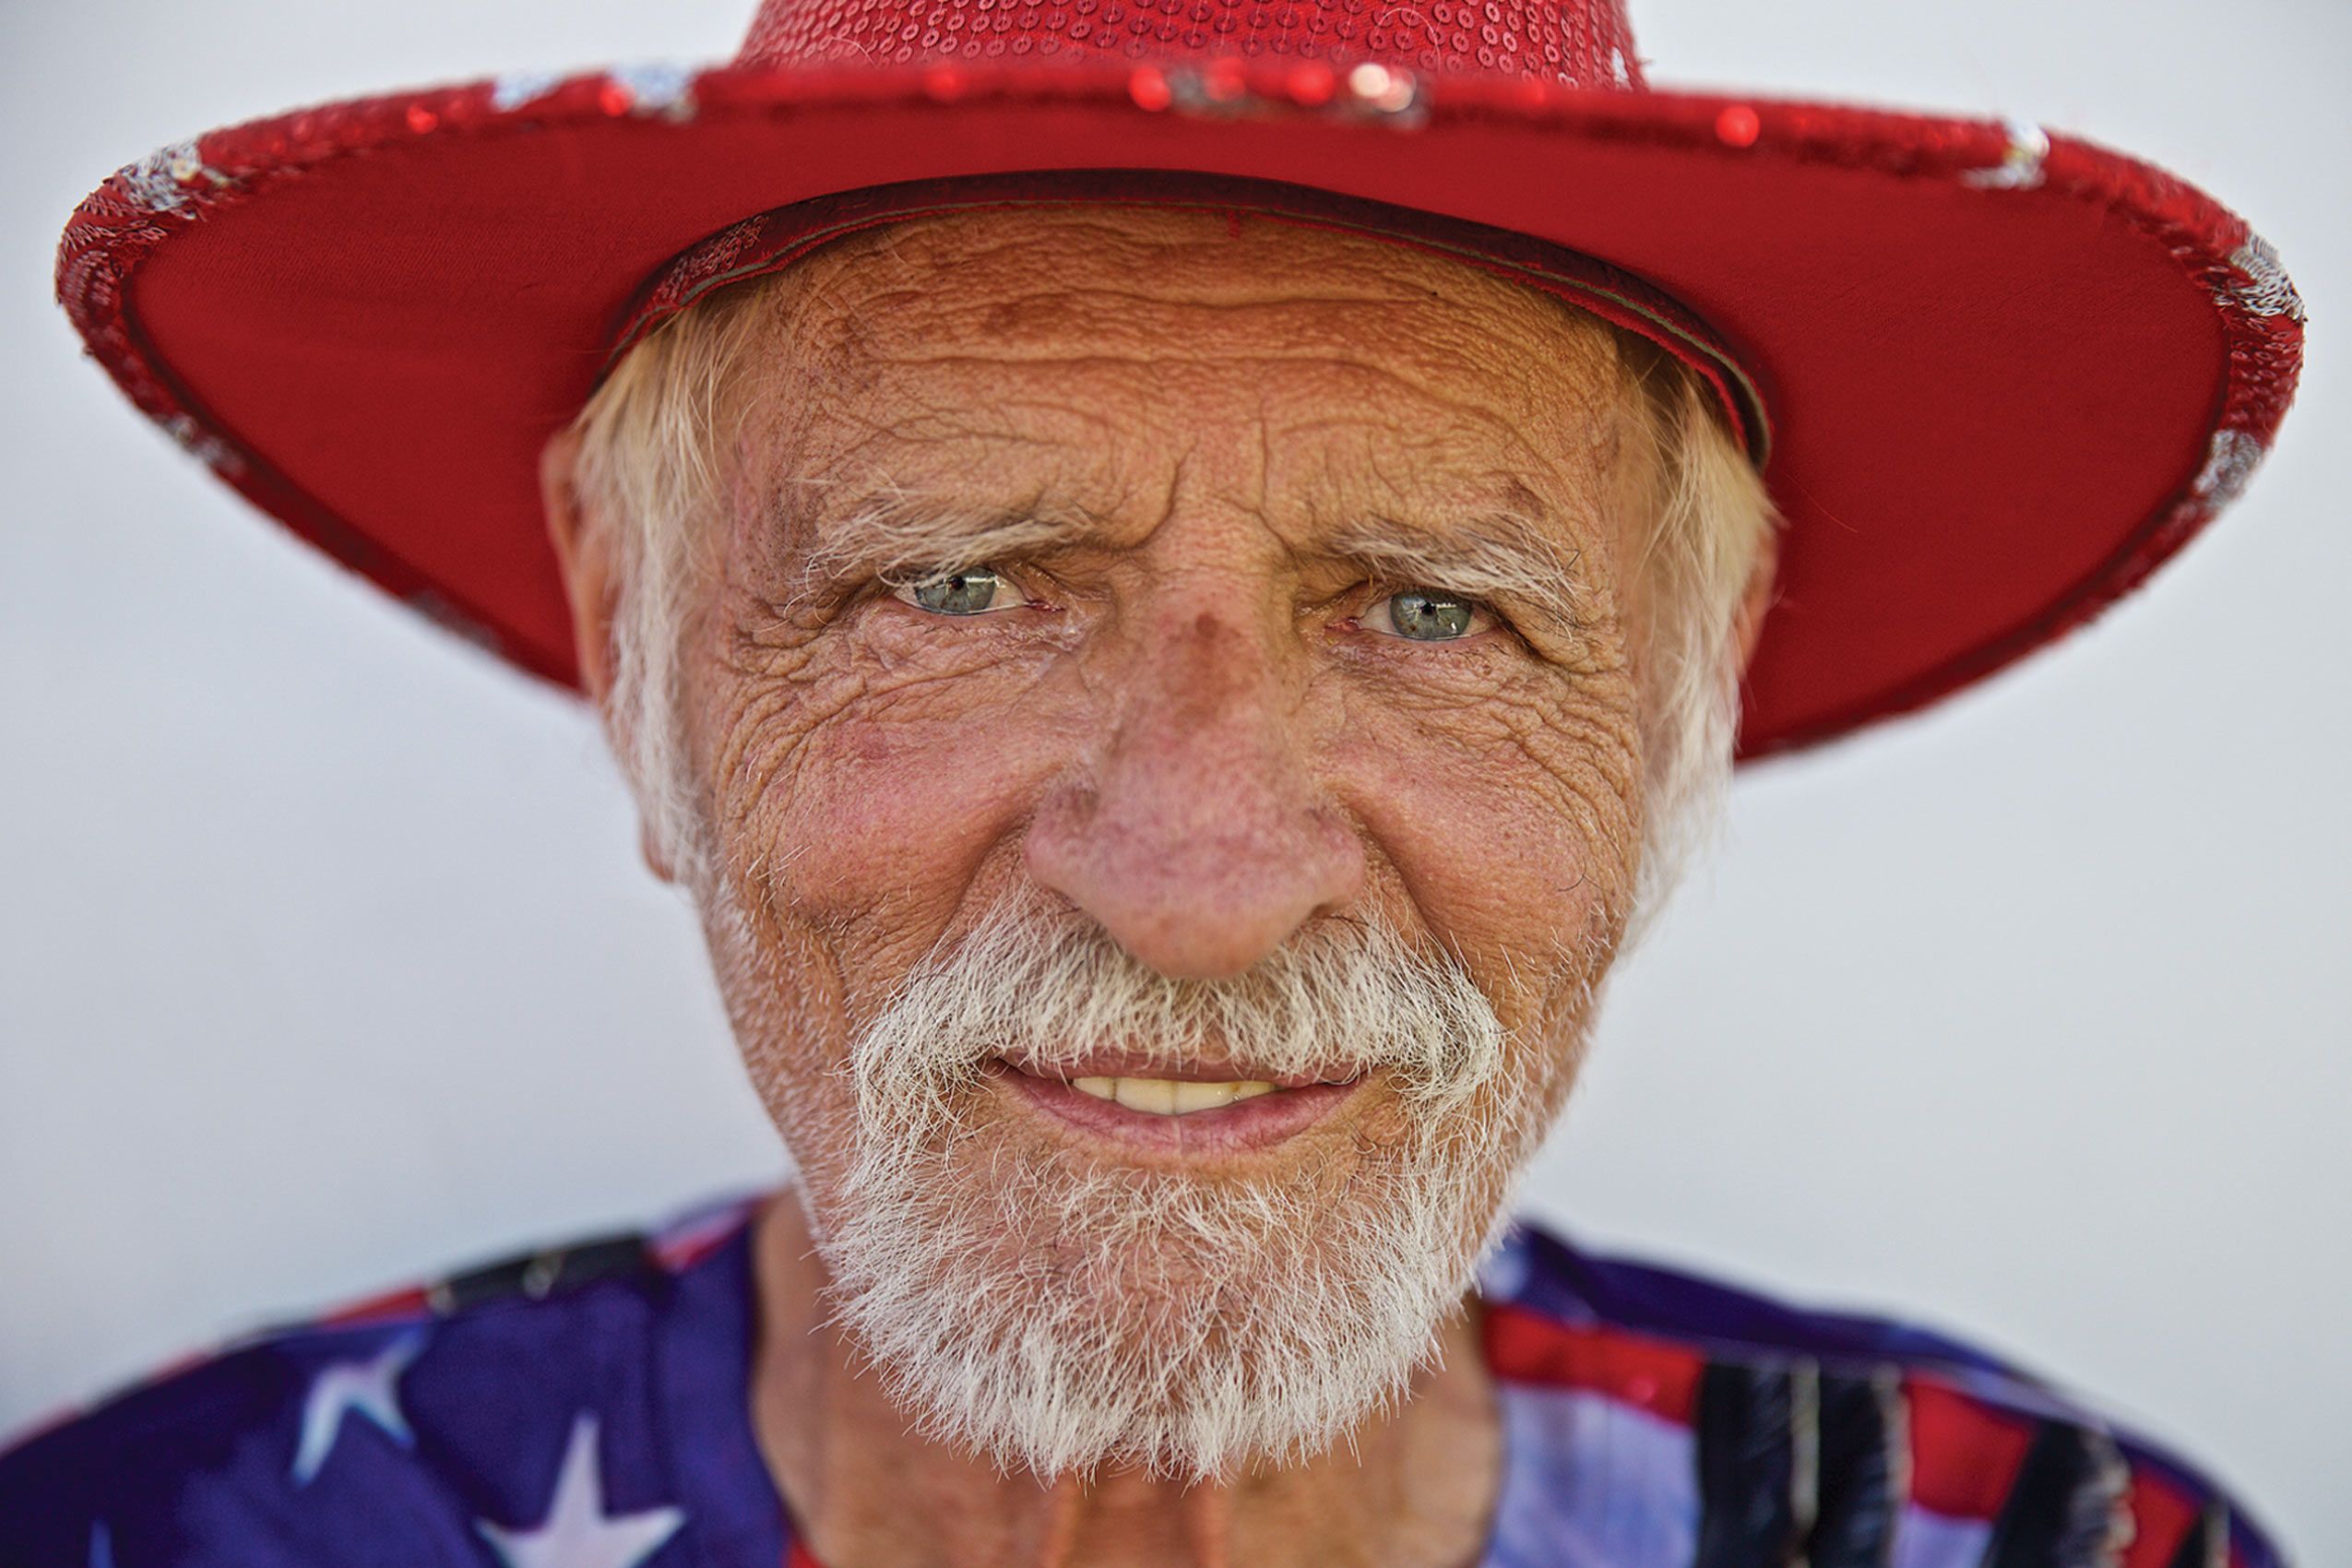 Head Shot of Man Smiling Dressed In Red White & Blue Colors